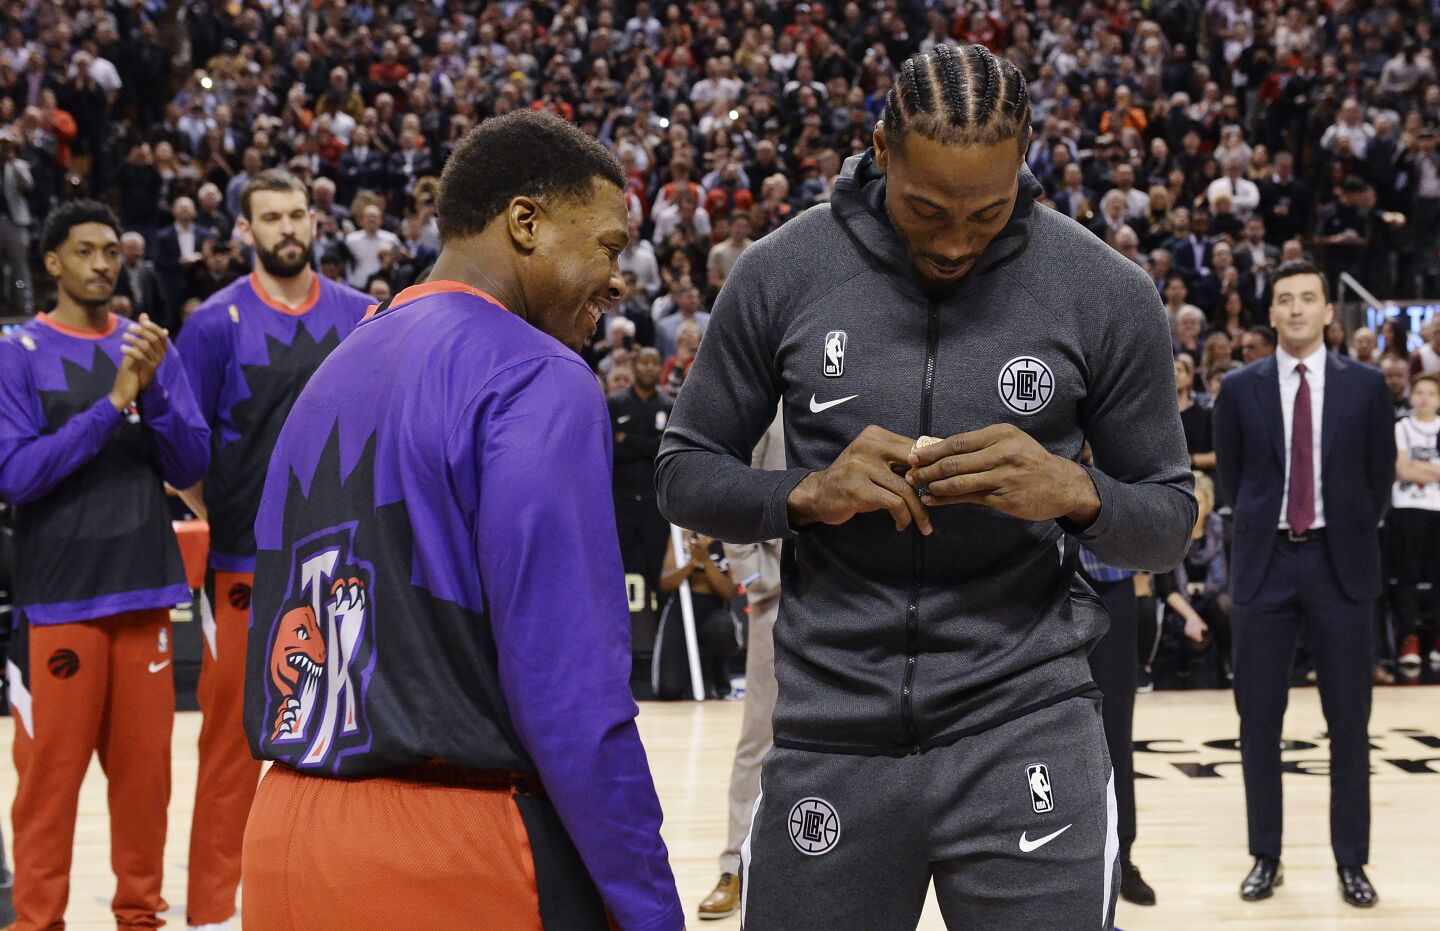 Kawhi Leonard receives his 2019 NBA championship ring from Raptors' Kyle Lowry prior to a game Dec. 11 in Toronto.